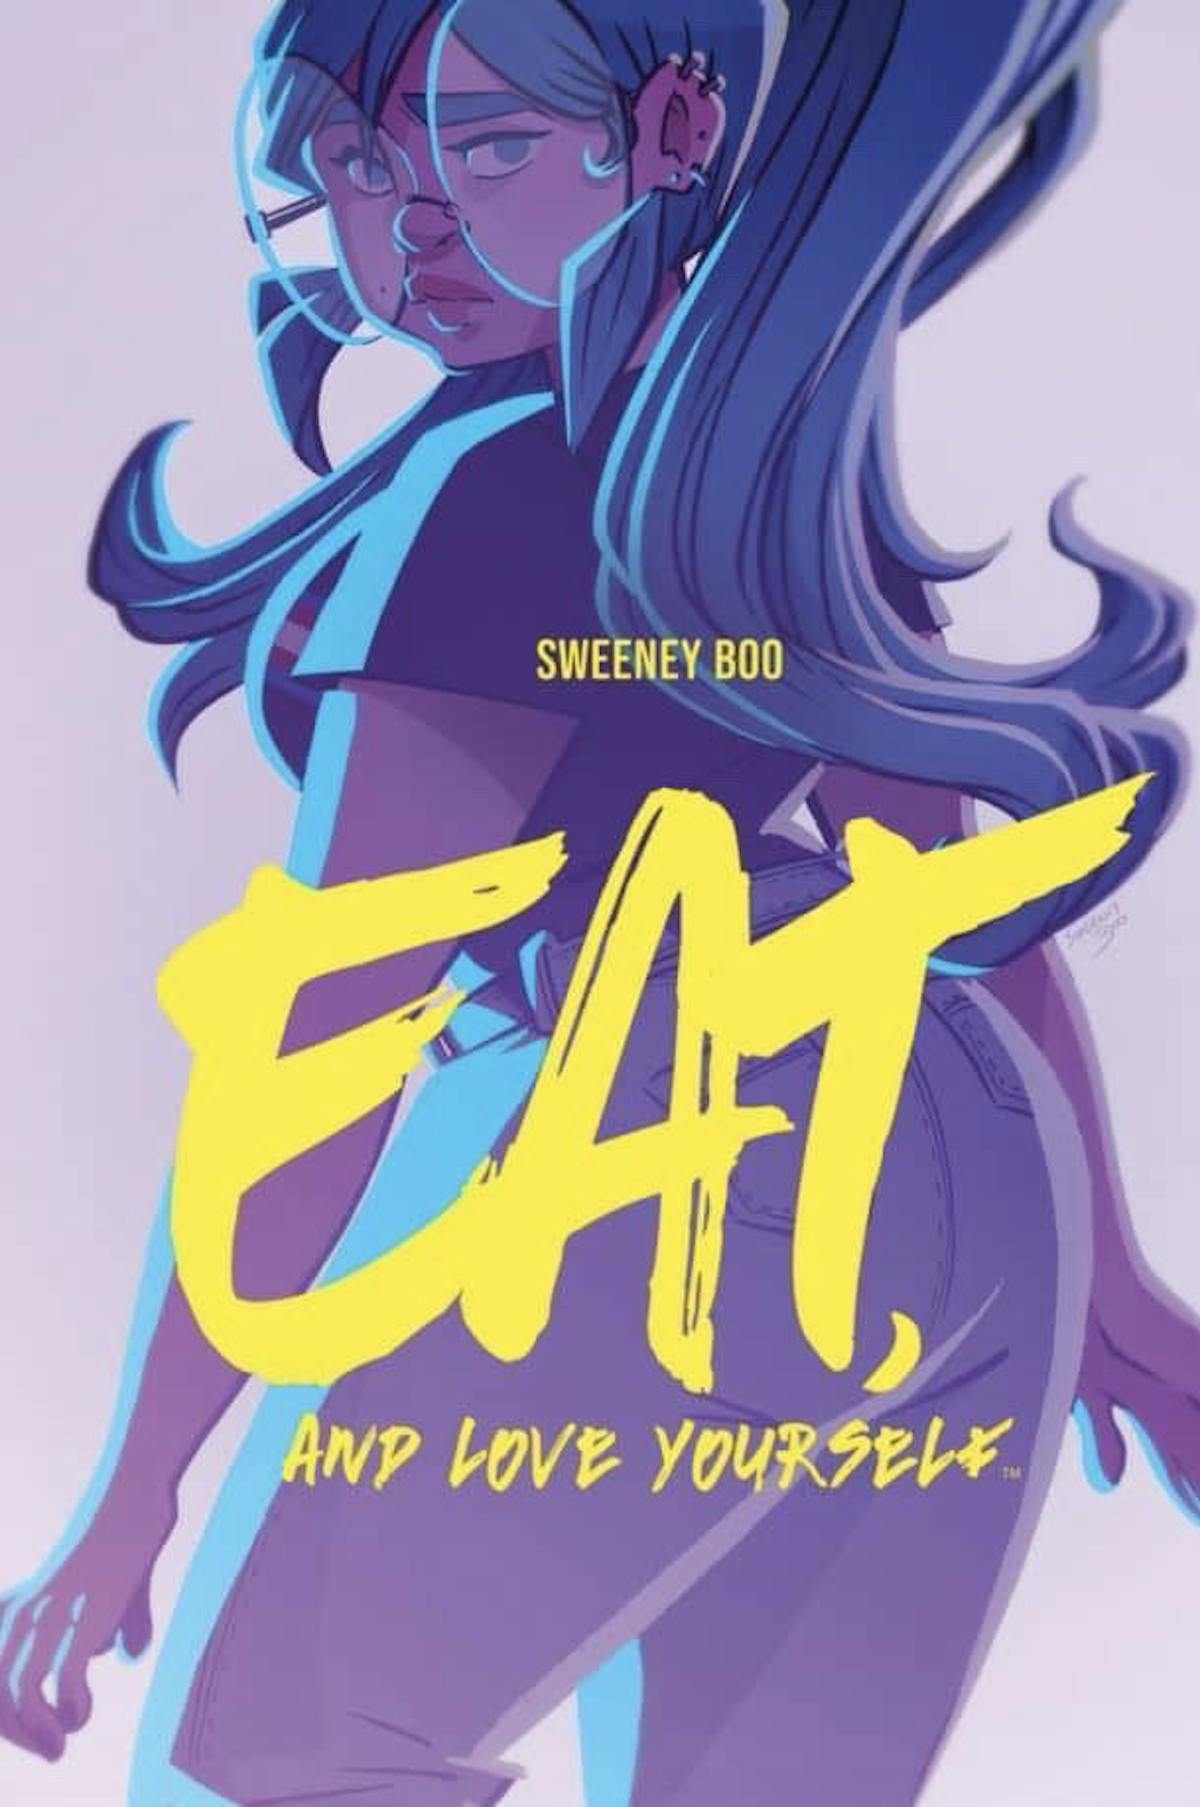 Eat and love yourself by Sweeney Boo 